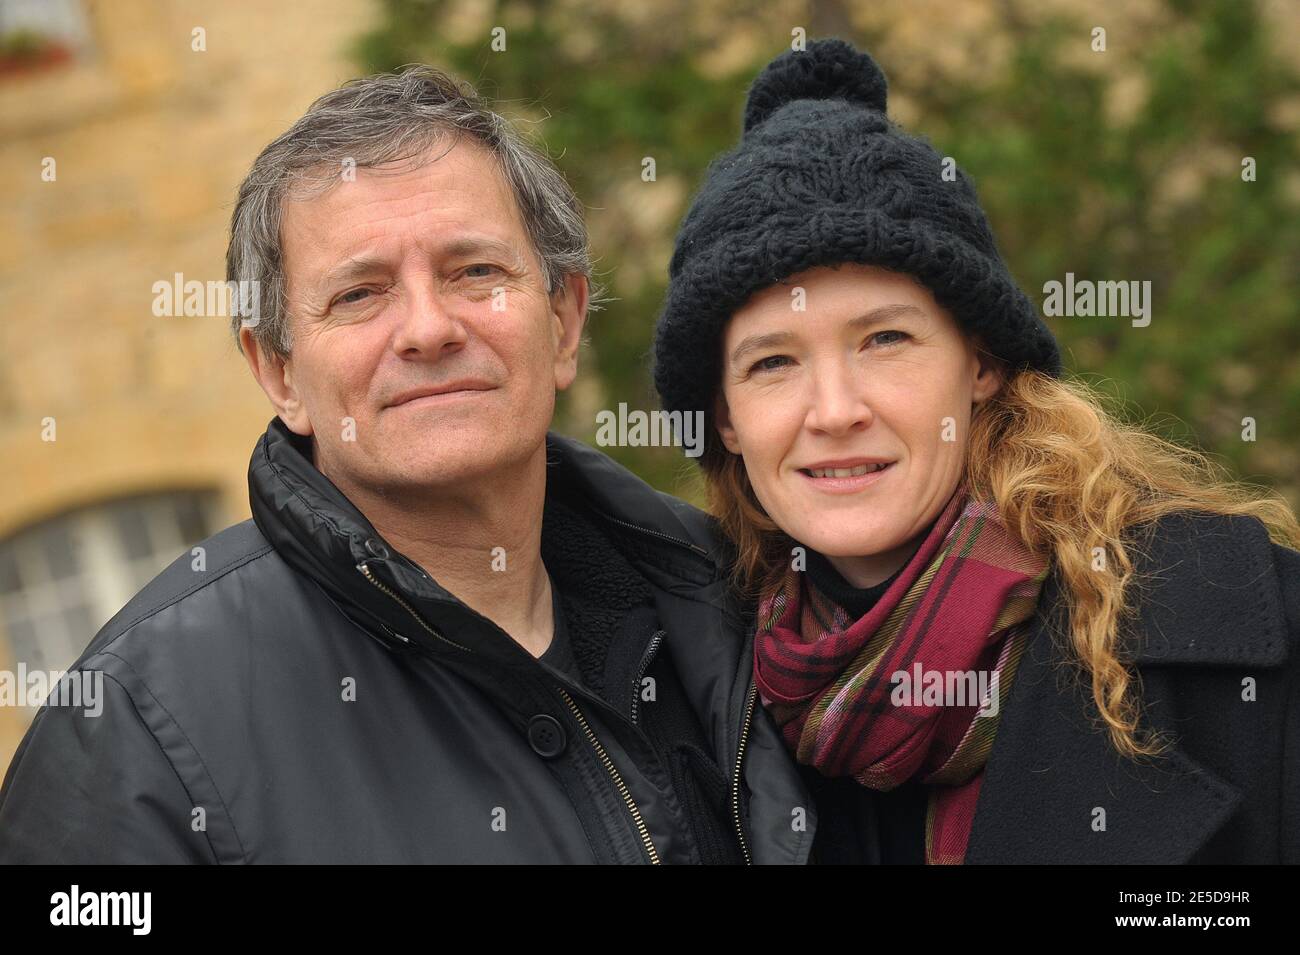 French director Francis Huster and Julika Jenkins present their upcoming movie 'L'homme et son chien' during the Sarlat Film Festival 2008 in Sarlat, south west of France, on November 14, 2008. Photo by Giancarlo Gorassini/ABACAPRESS.COM Stock Photo